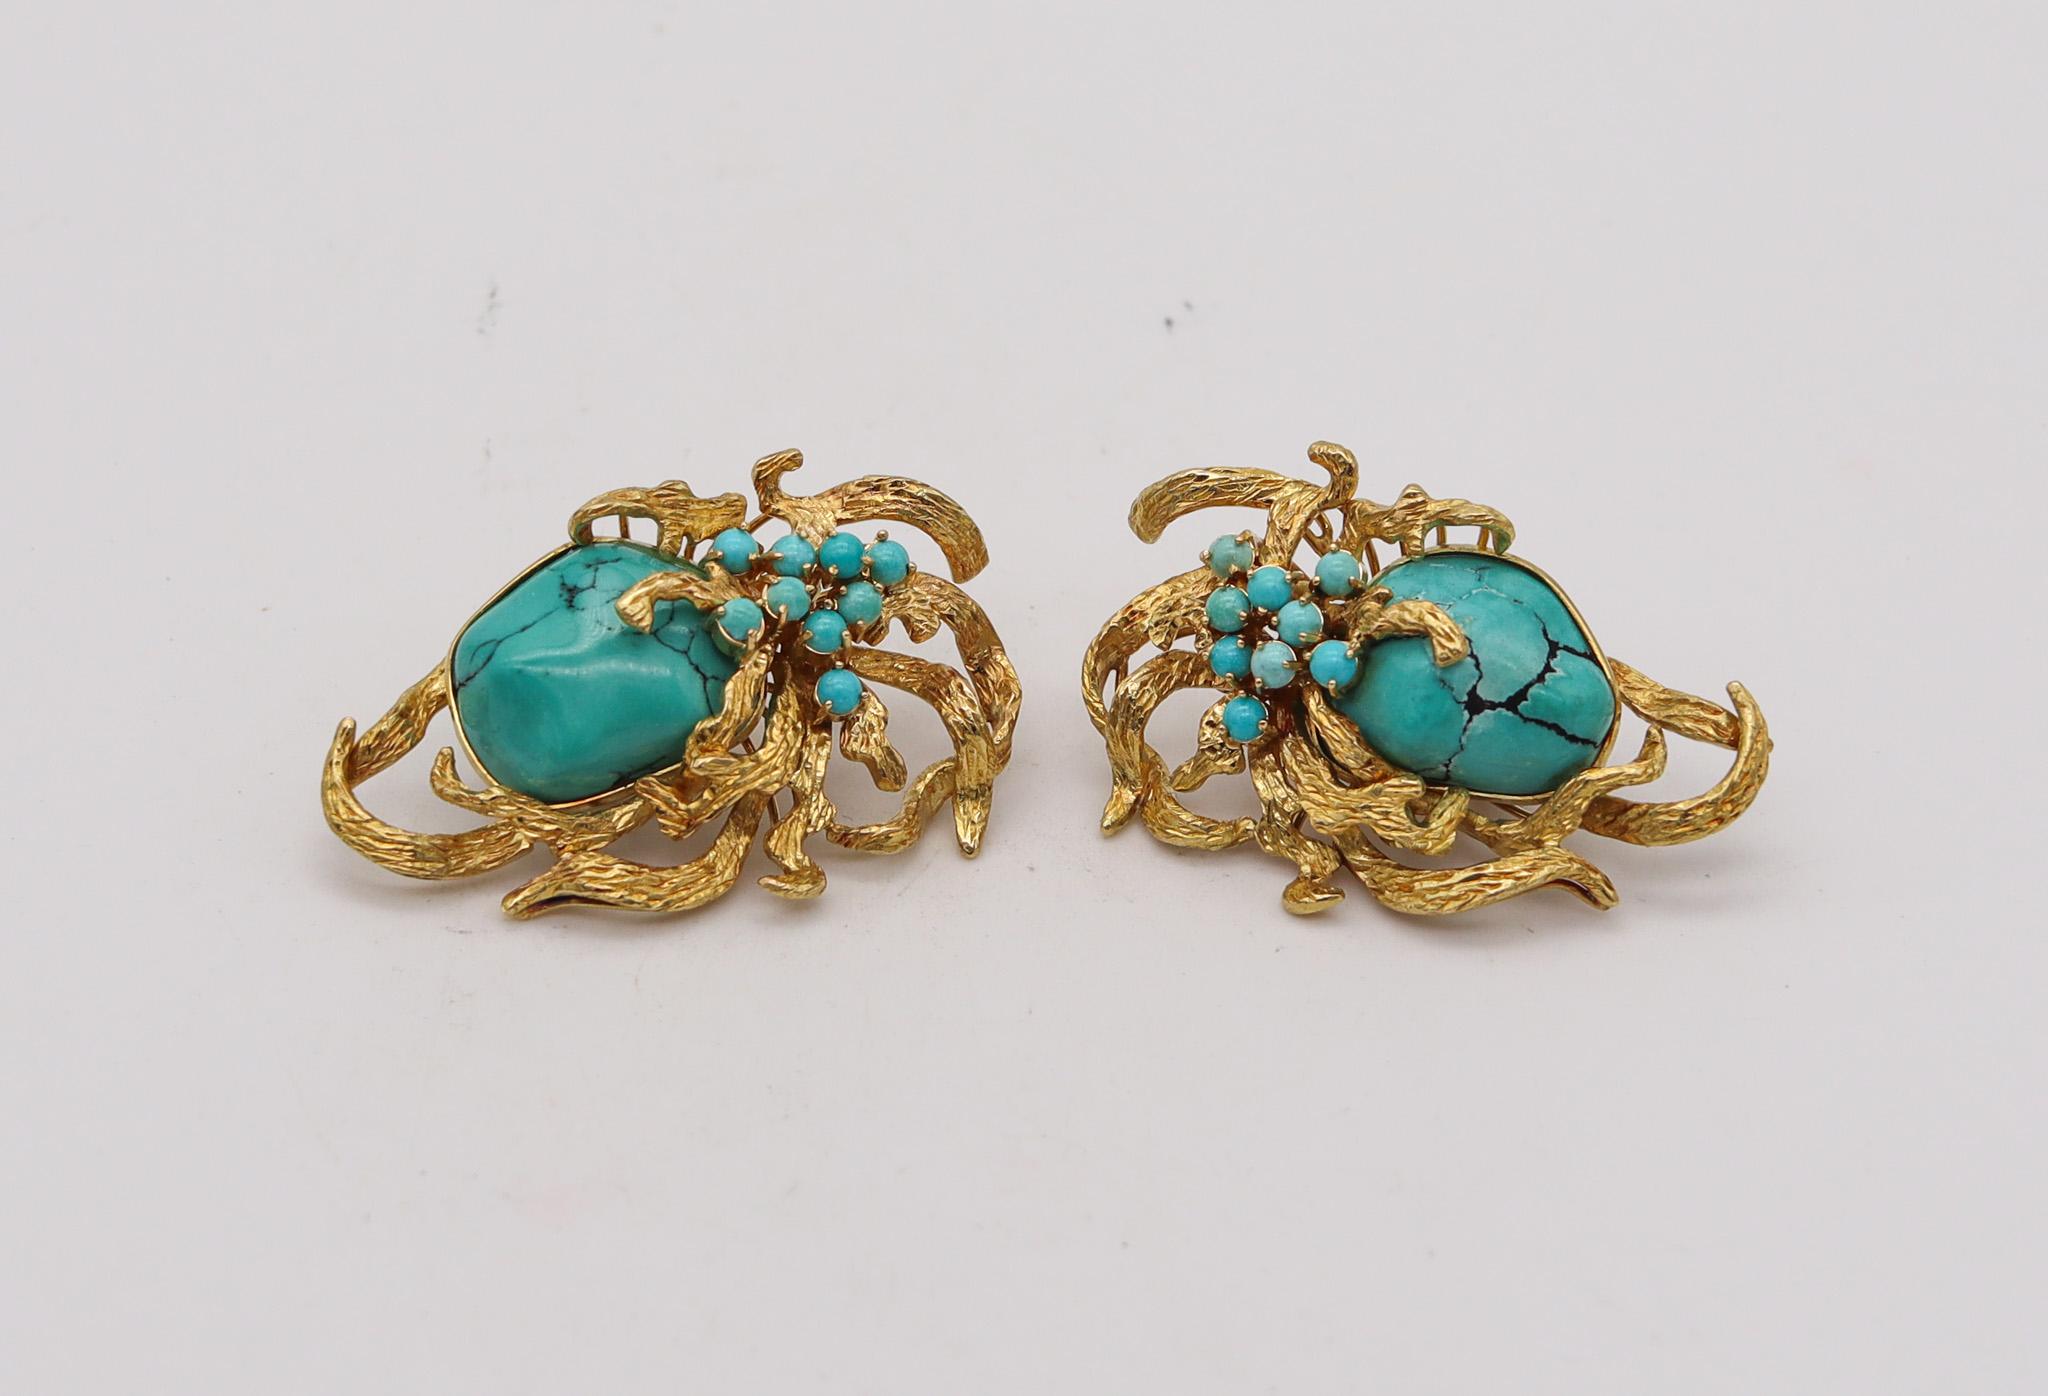 Retro modernist clips-on earrings with turquoises.

A gorgeous sculptural pair of earrings, created with voluptuous organic free shapes during the mid-century period, back in the 1960. These clips are very beautiful and unusual and has been designed